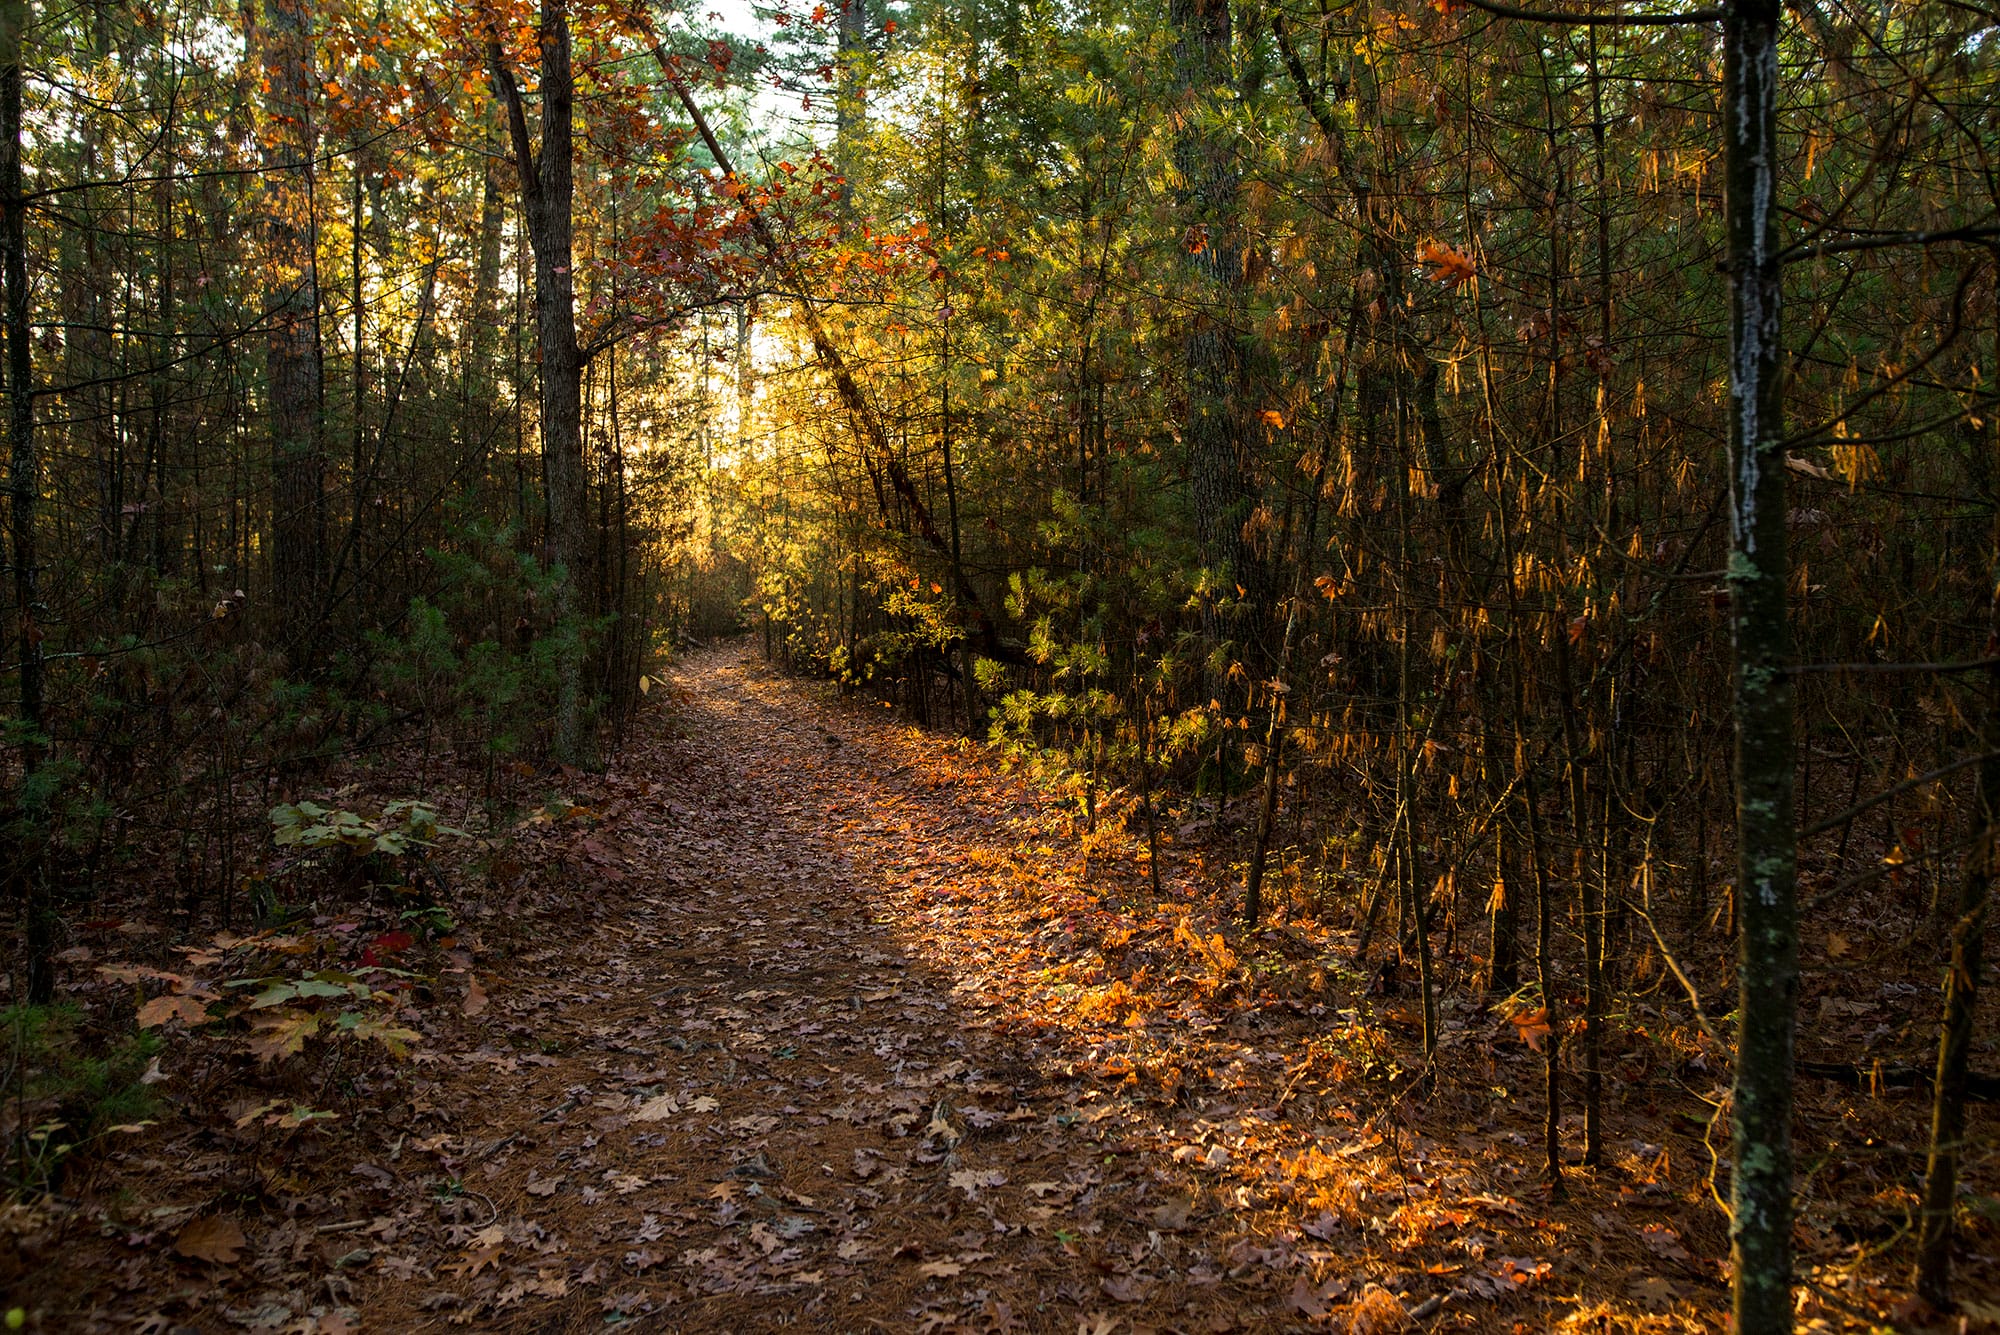 A trail in a wooded area with autumn leaves.